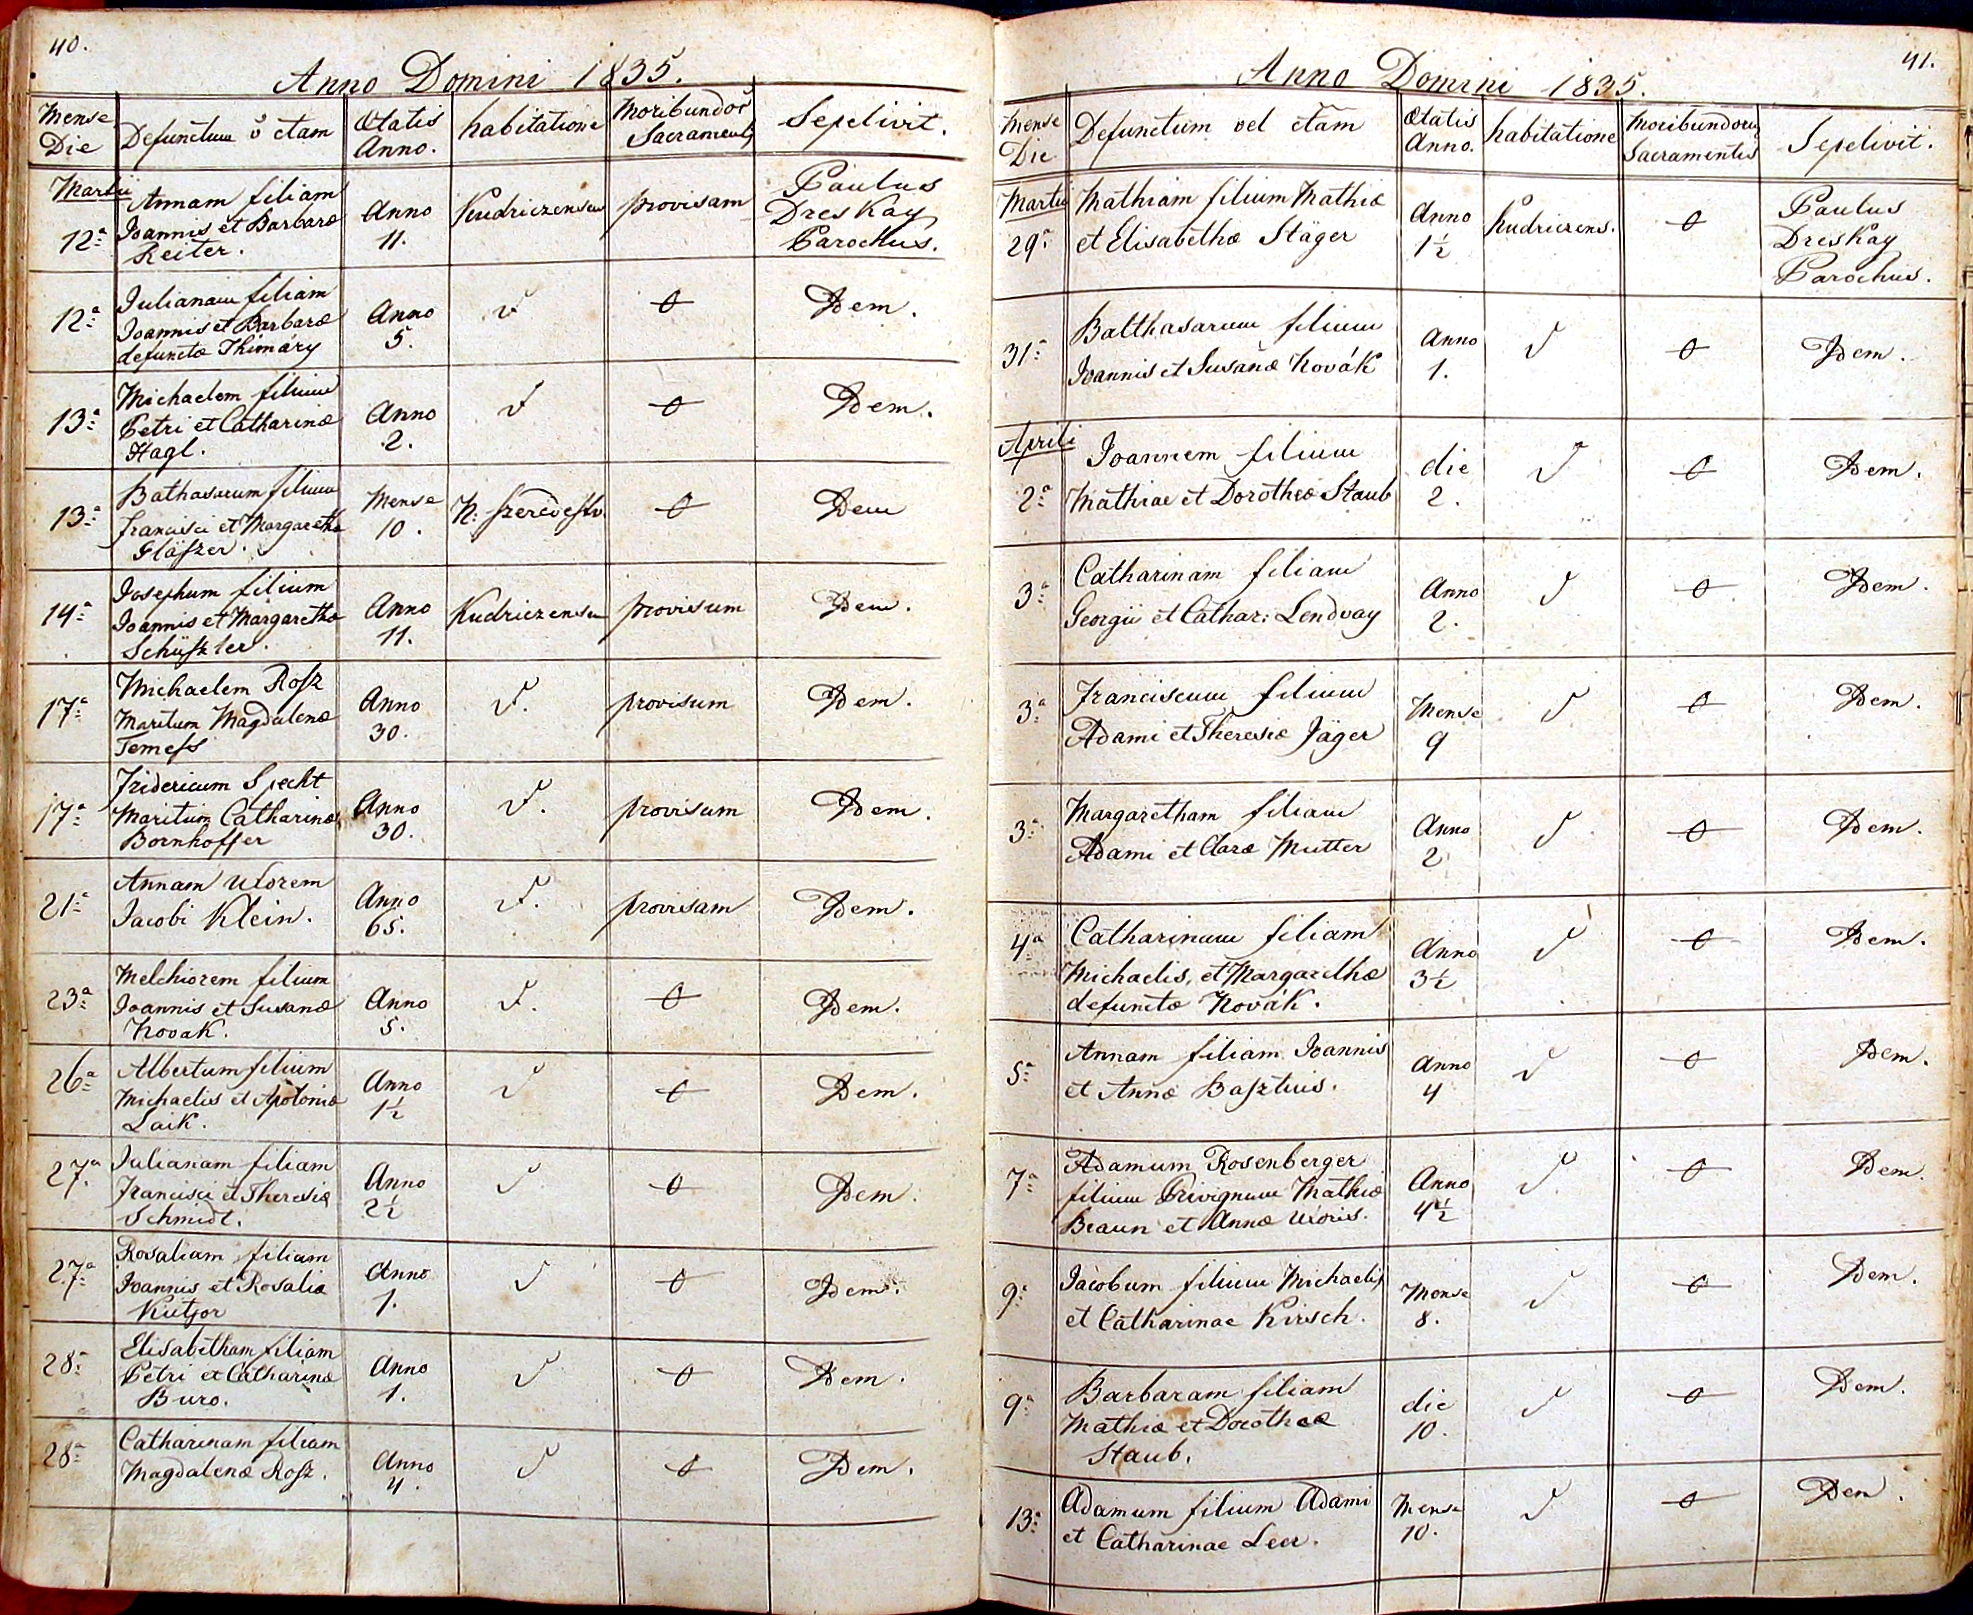 images/church_records/DEATHS/1775-1828D/040 i 041